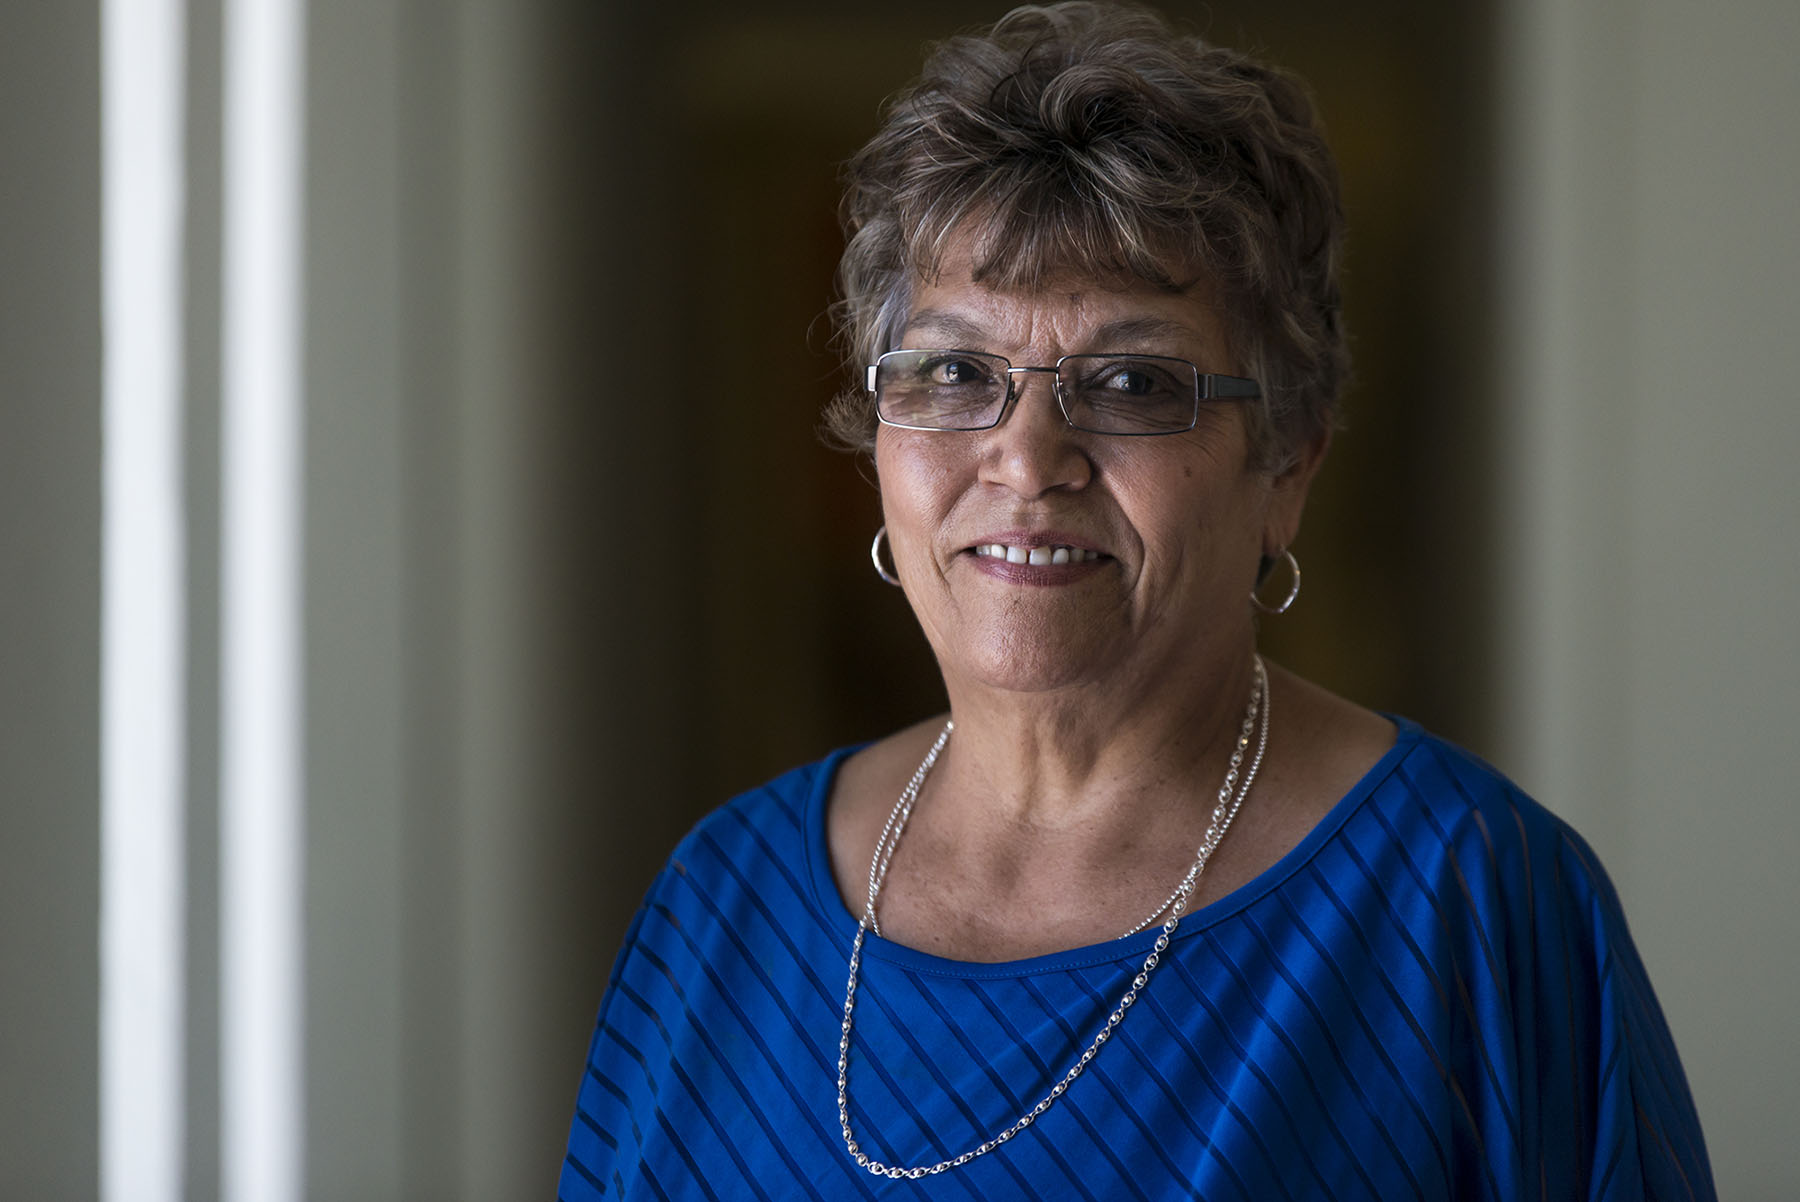 Gloria Torres serves as a city councilwoman and school board member in the border town of San Luis, Arizona. (Photo by Roman Knertser, audio by Pam Ortega/News21)